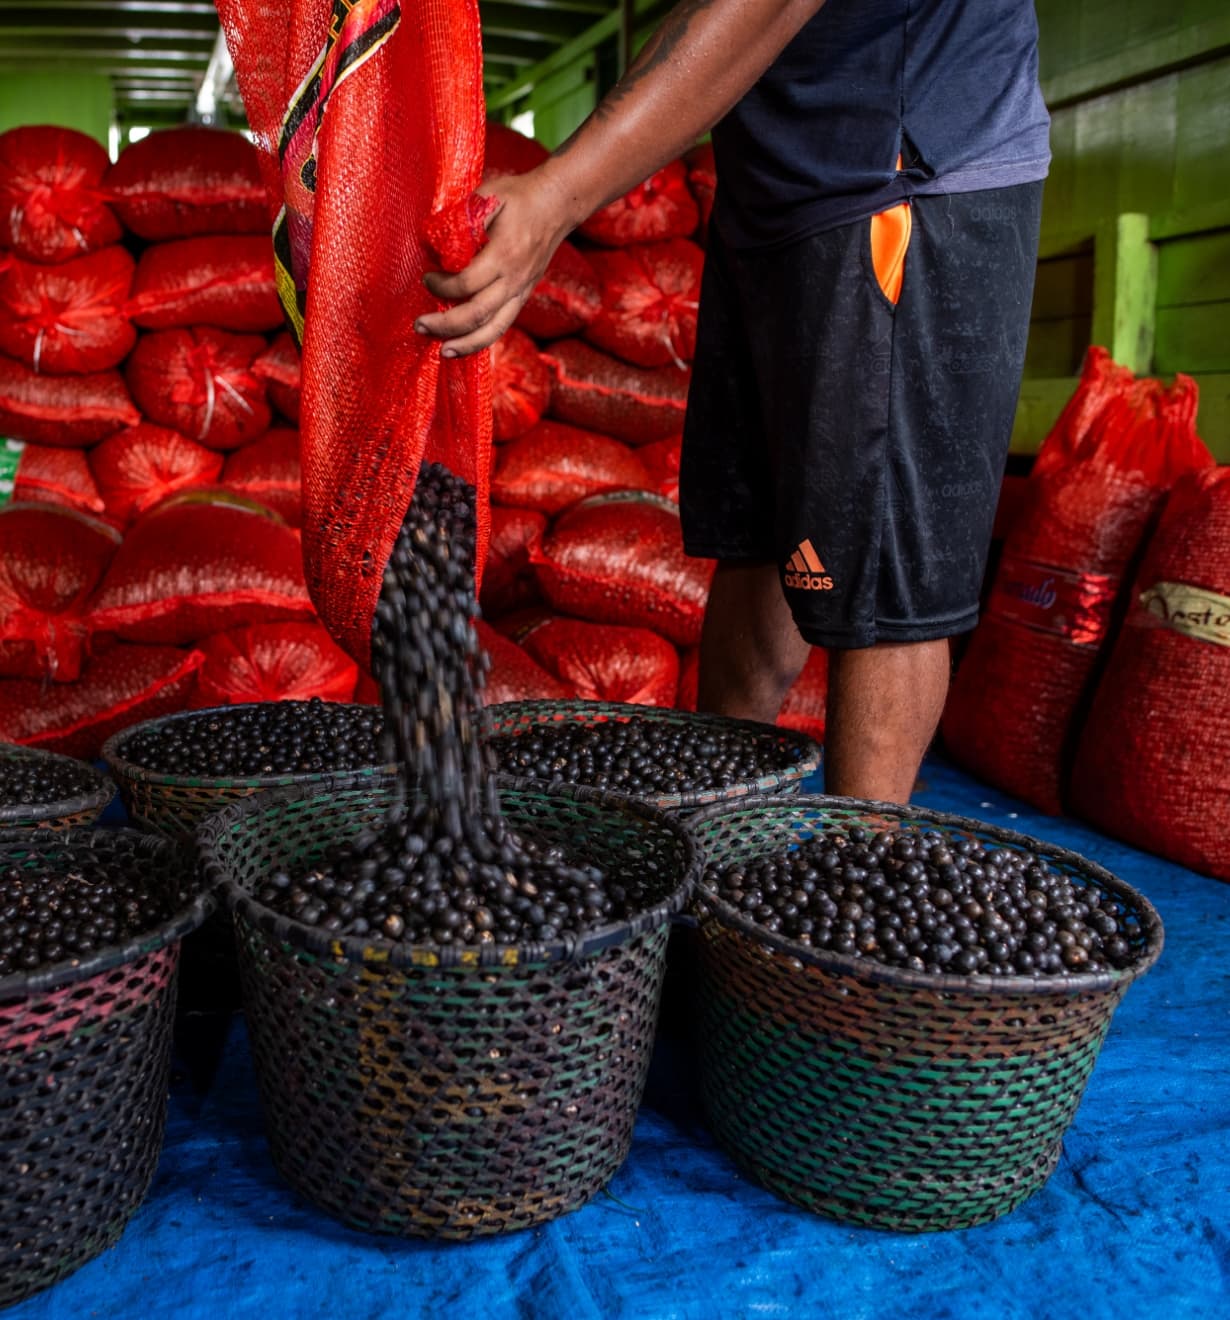 The açai is poured from the sacks into baskets